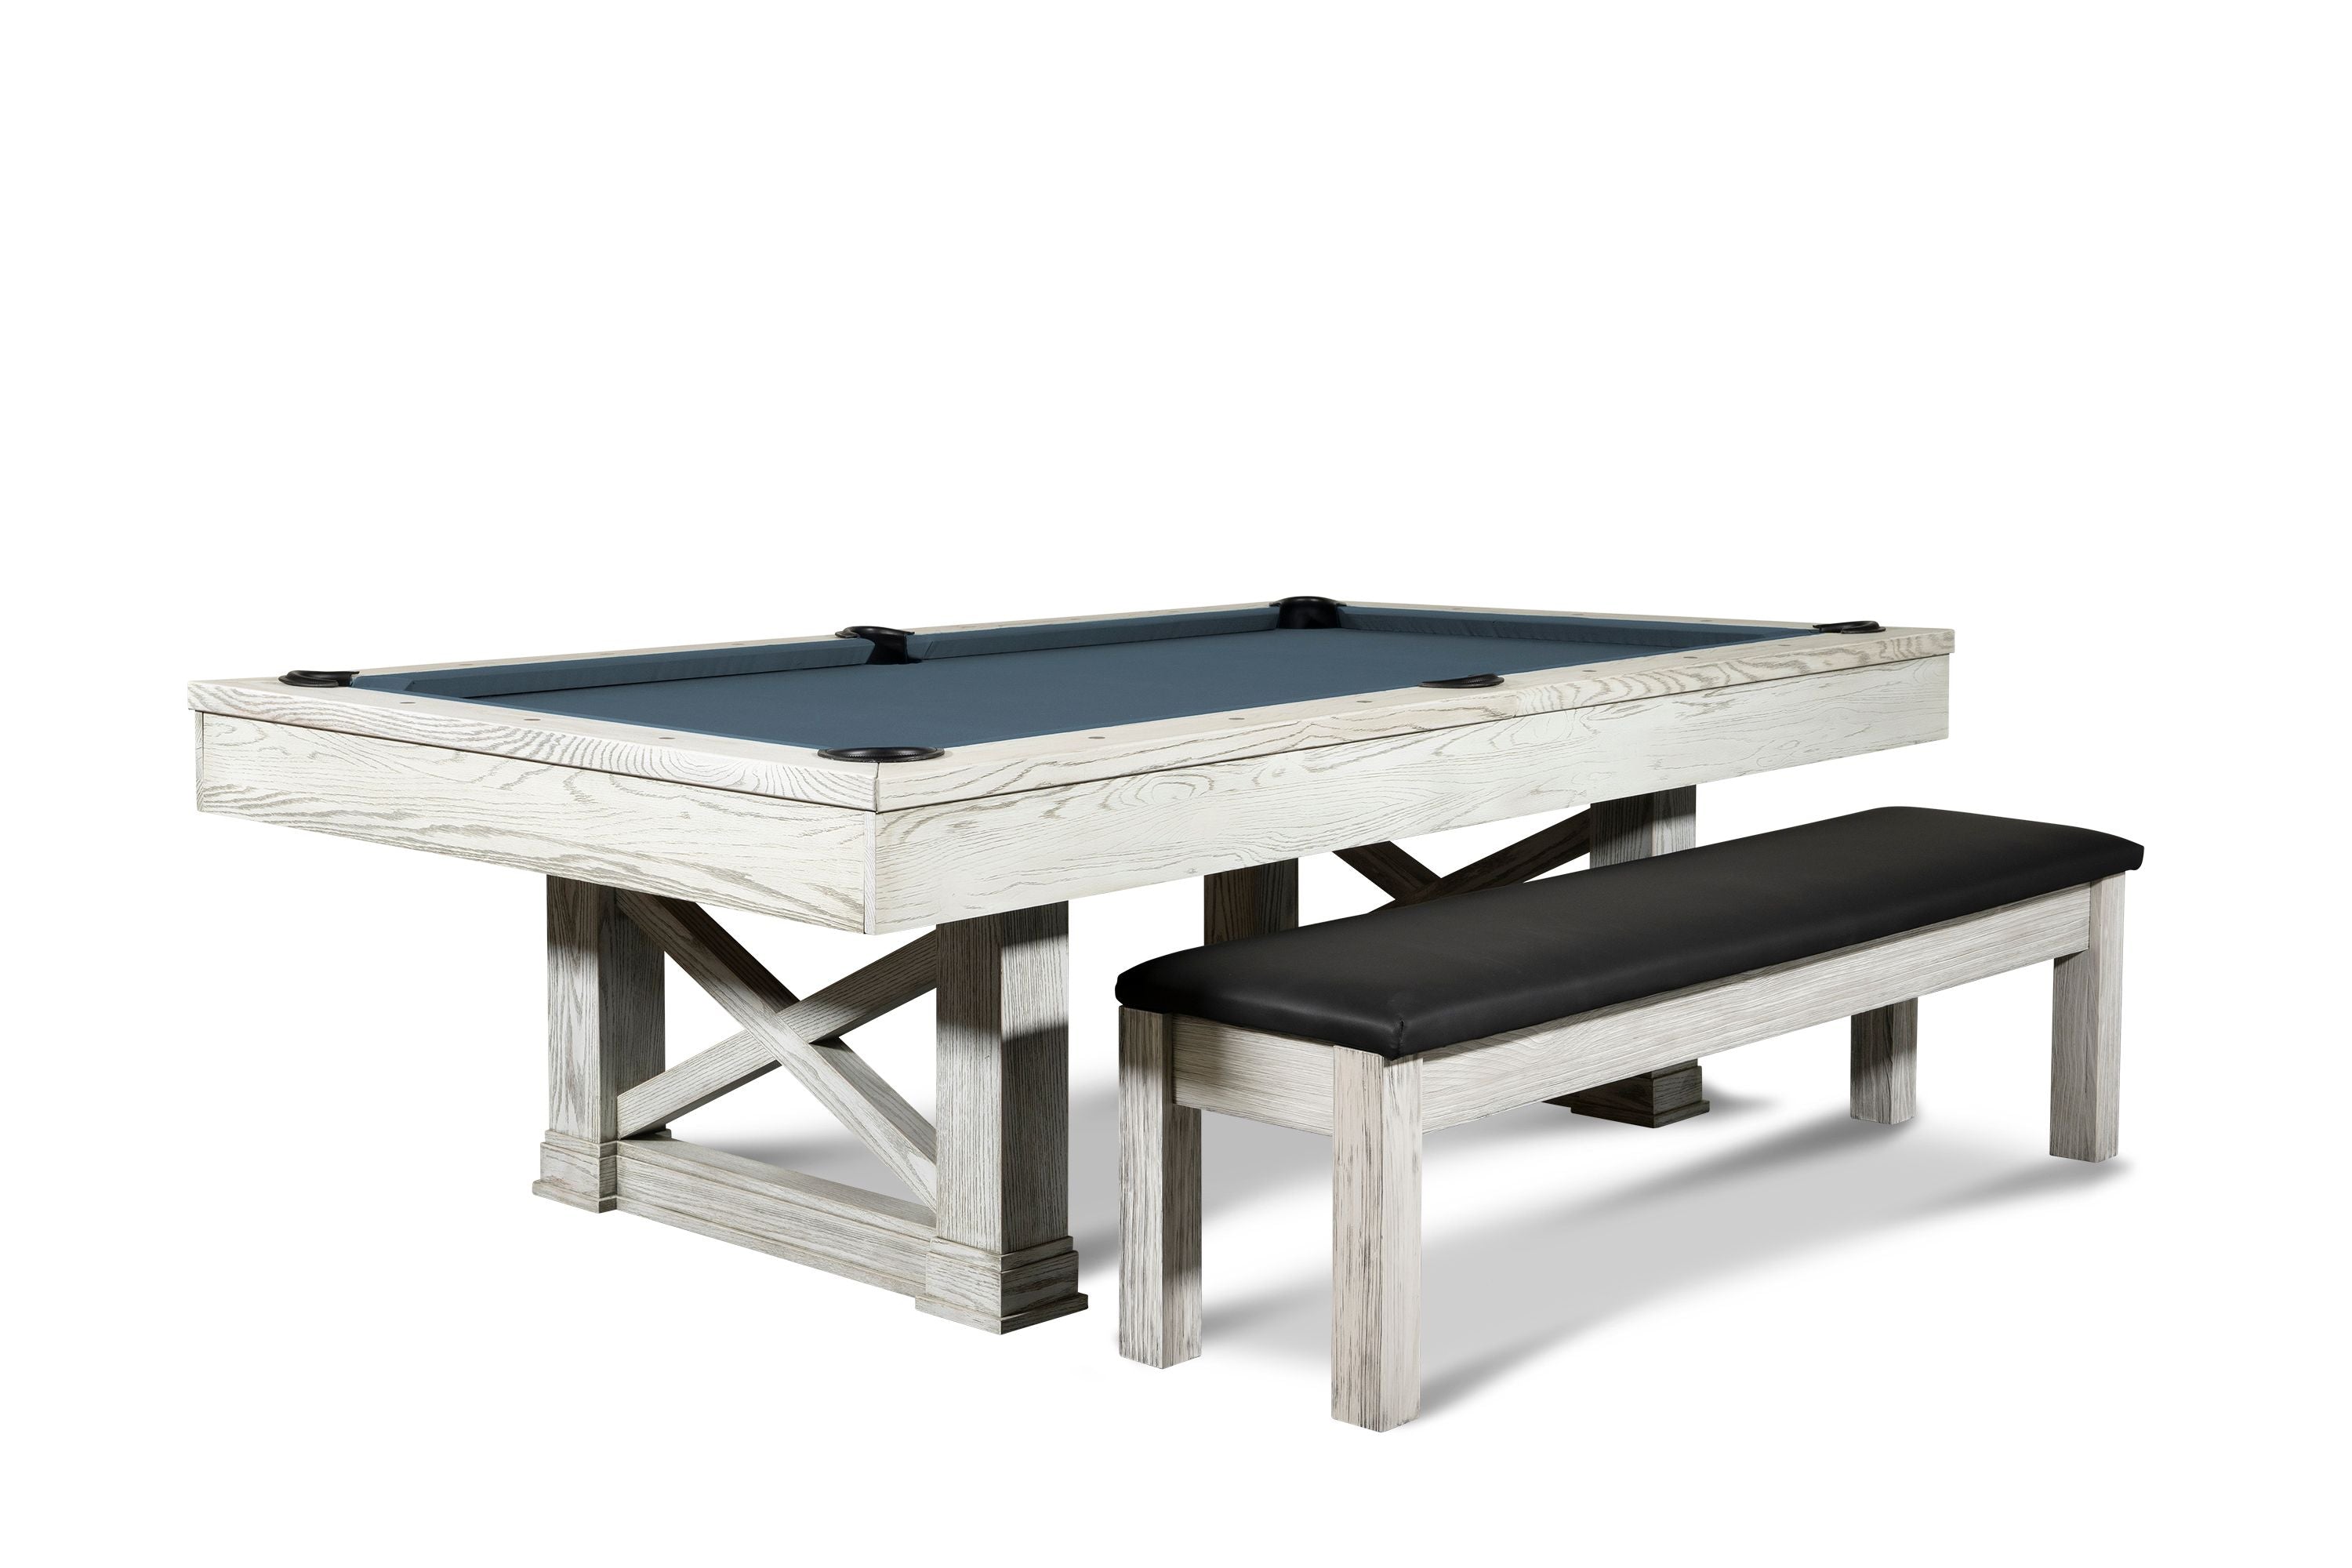 Nixon Billiards Nora Slate Pool Table ISAF-90060/ISAF-90062 White Wash With Matching Chair